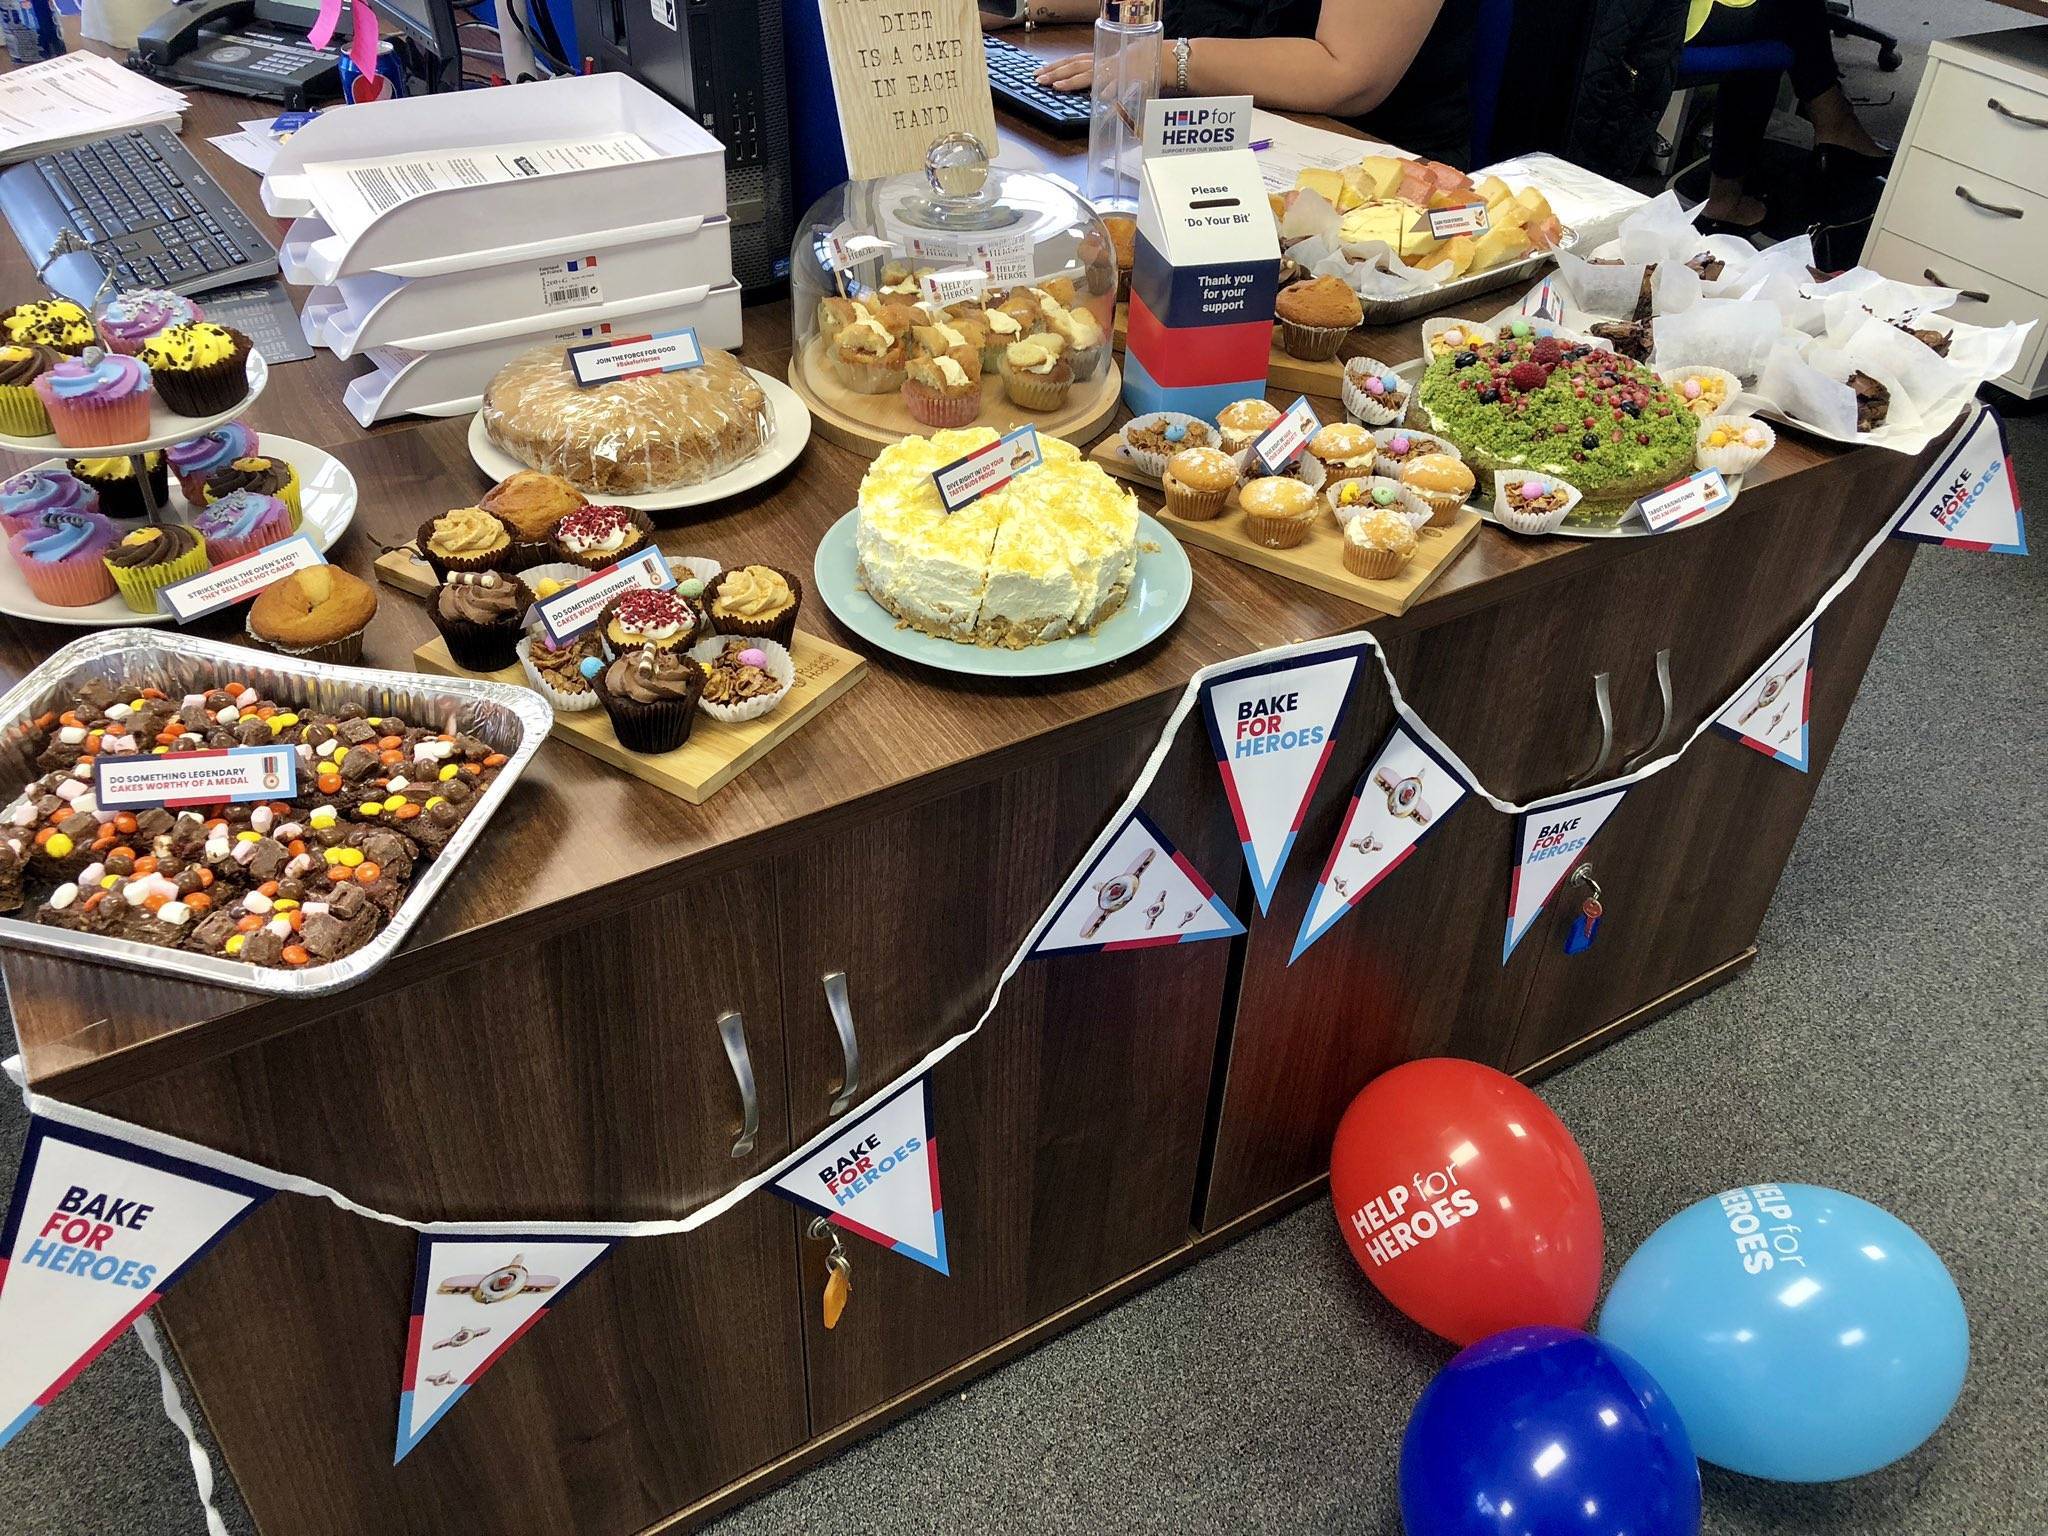 A table containing lots of baked goods decorated with Help for Heroes banners, bunting and signage